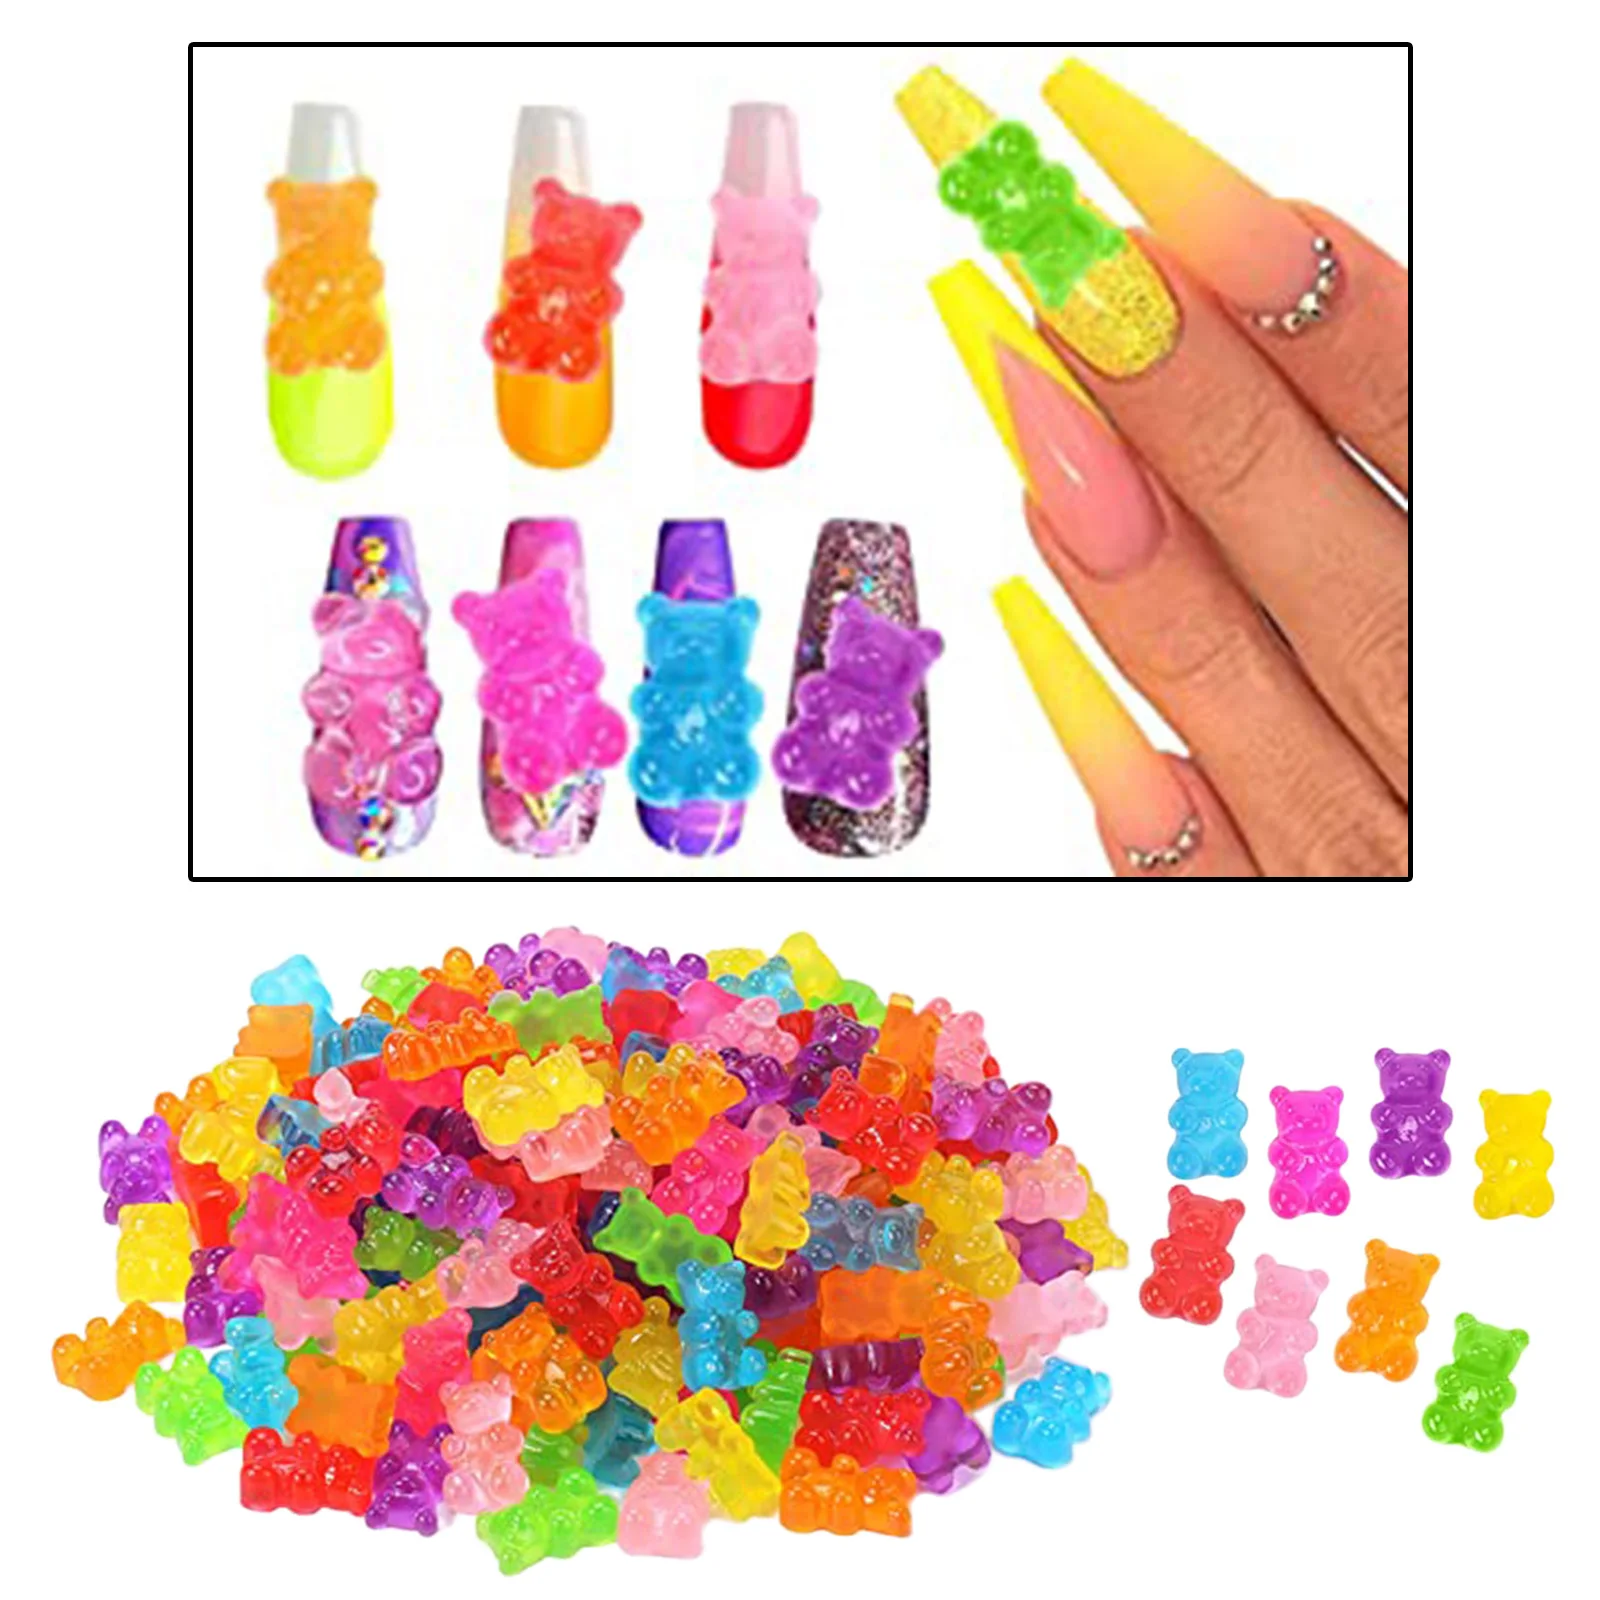 50x Colorful Gummy Resin Bear Nail Charms with Hole for DIY Nails Jewelry Making Necklace Nail Art Decoration for Children Girls